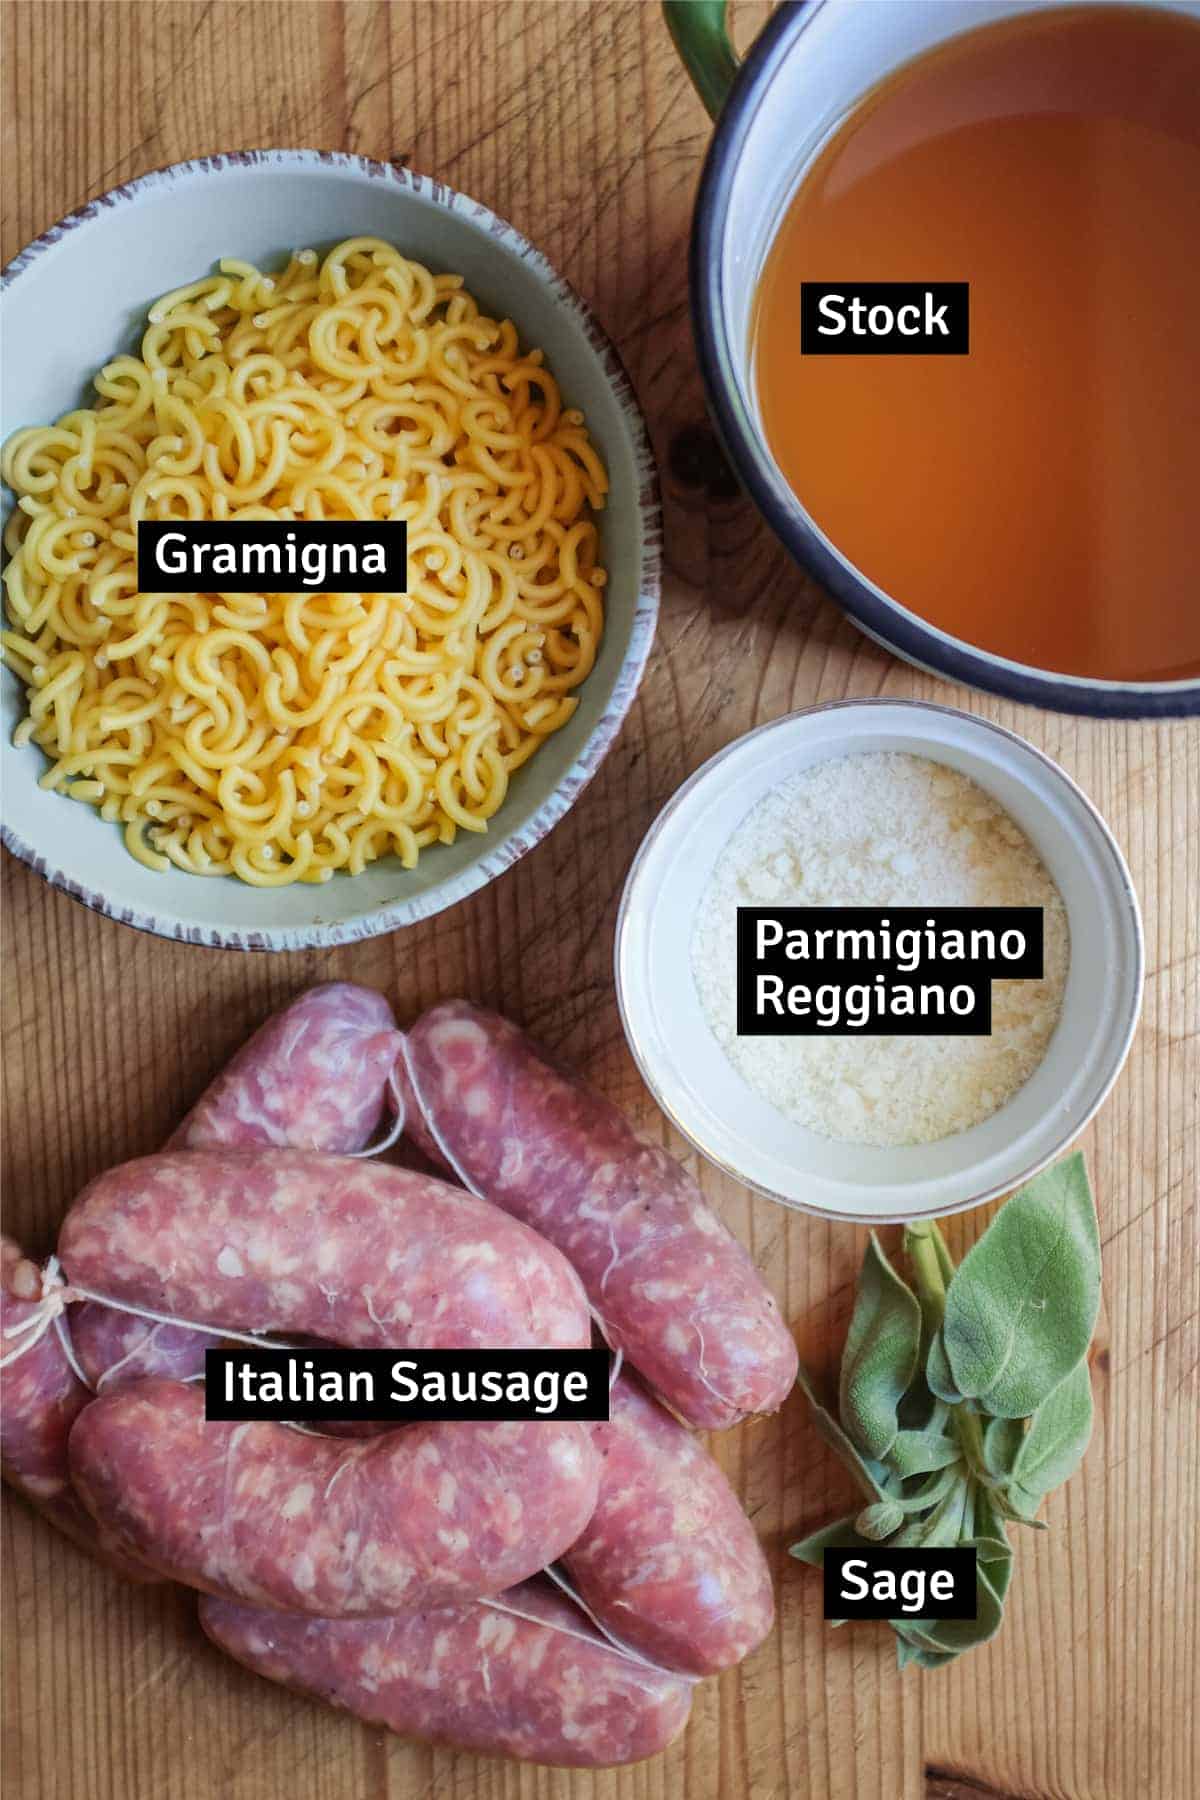 The ingredients for Gramigna Pasta with Sausage: Gramigna Pasta, Sausage, Sage, Parmigiano Reggiano and Stock